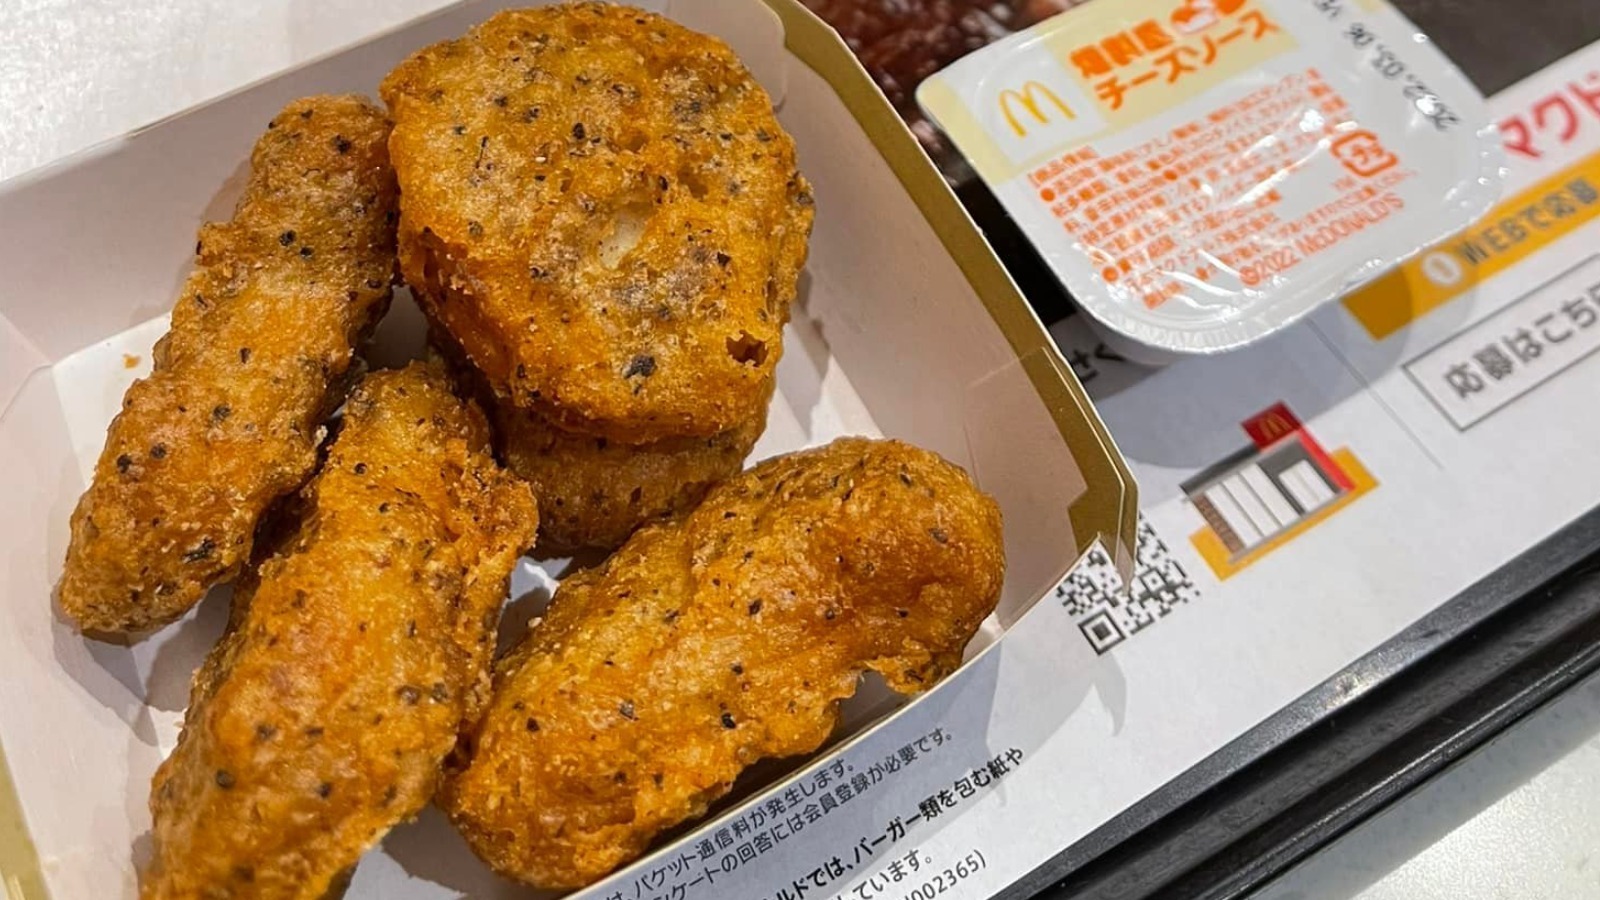 What Makes McDonald's Japan's New Spicy Nuggets So Unique